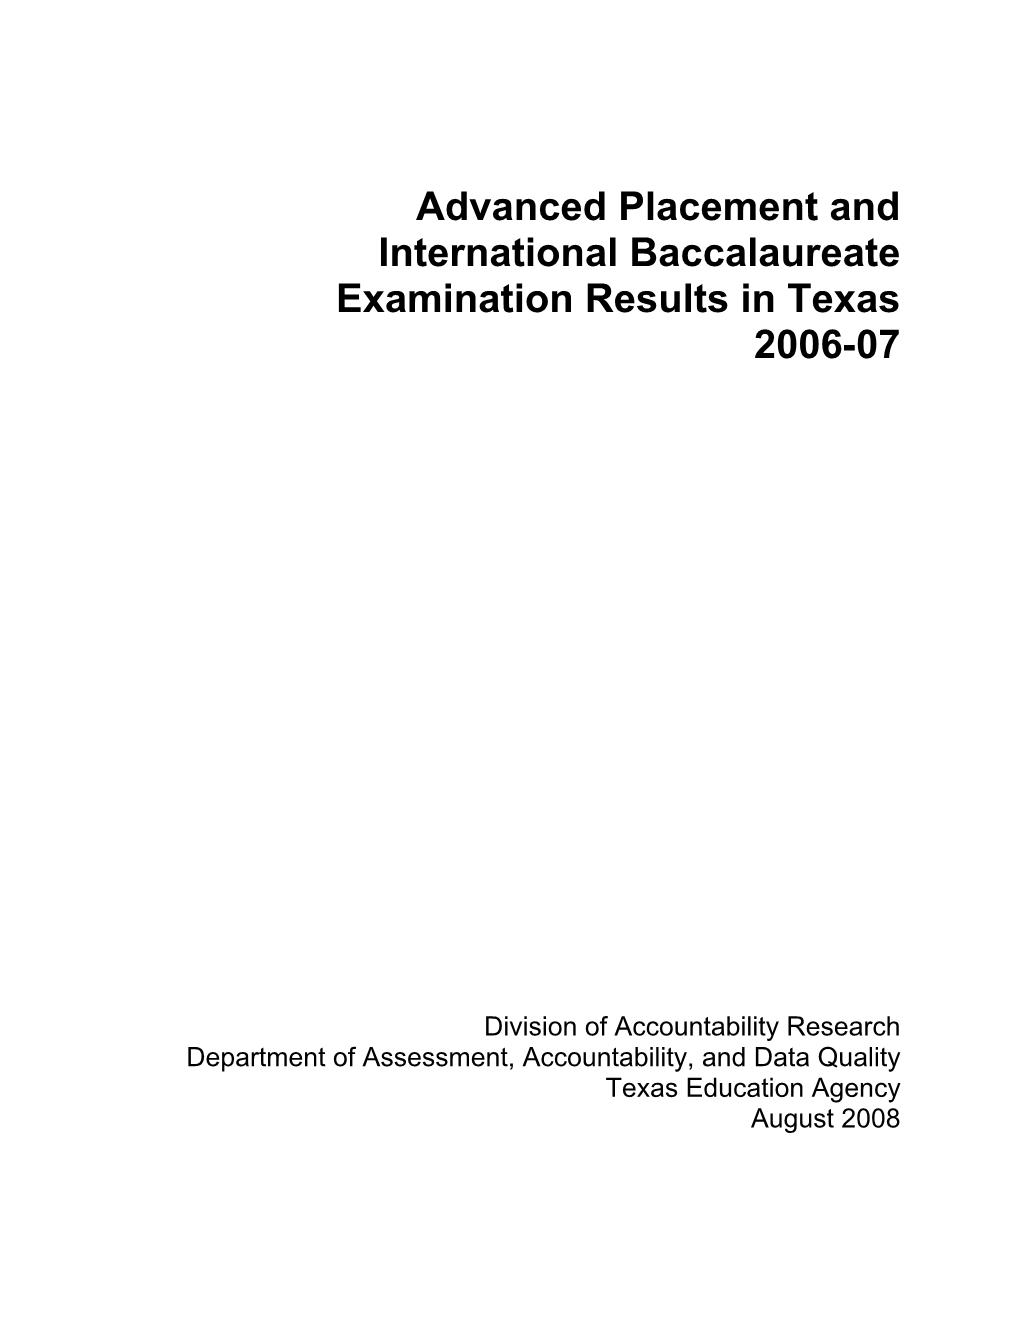 Advanced Placement and International Baccalaureate Examination Results in Texas 2006-07